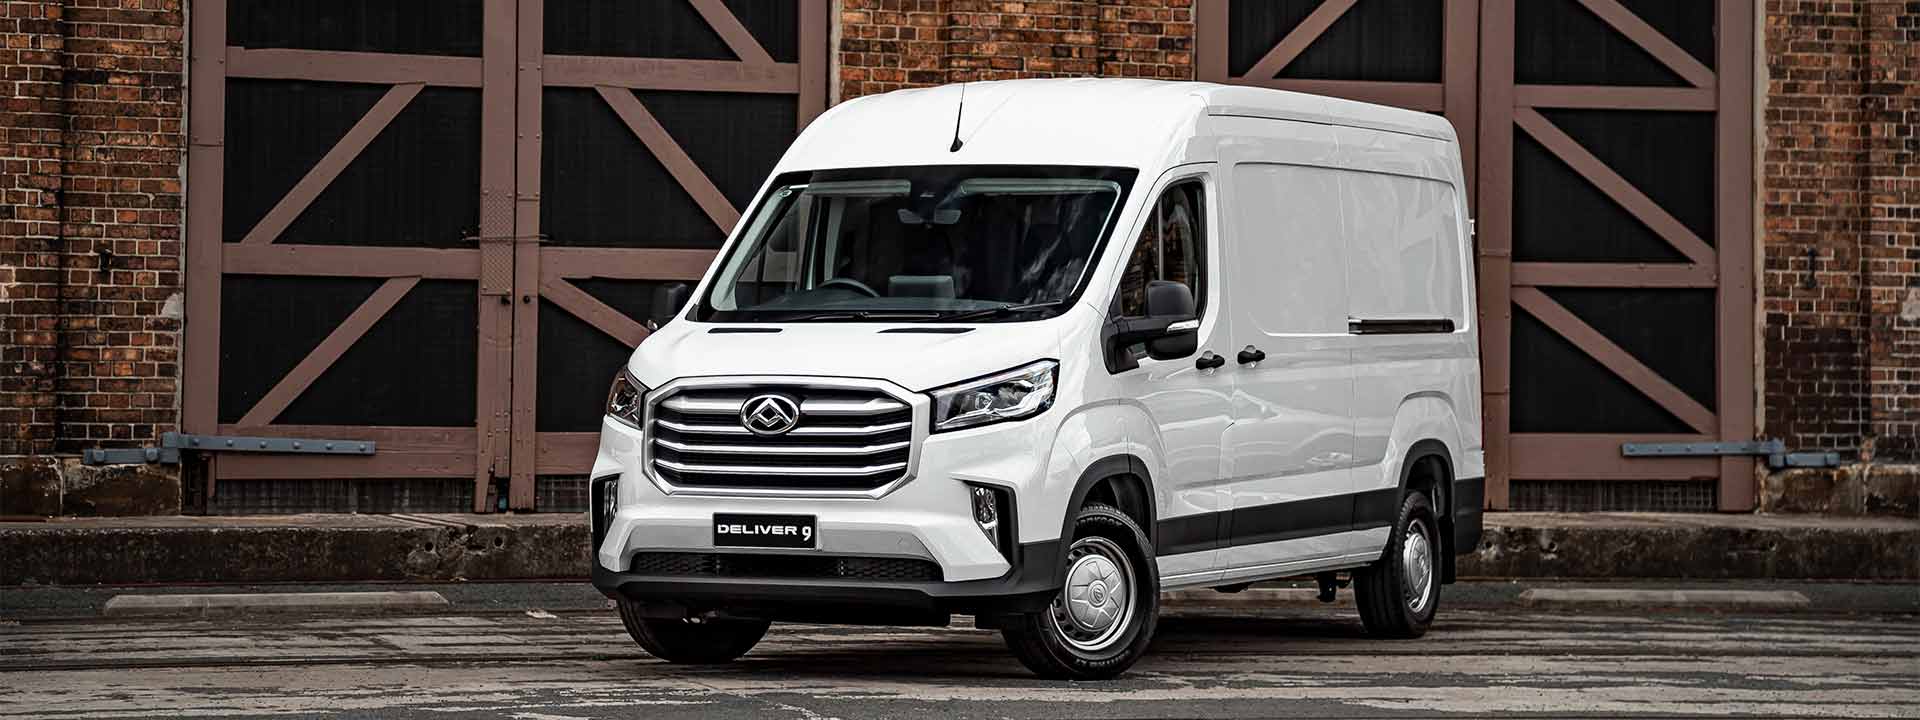 The van that delivers more Image